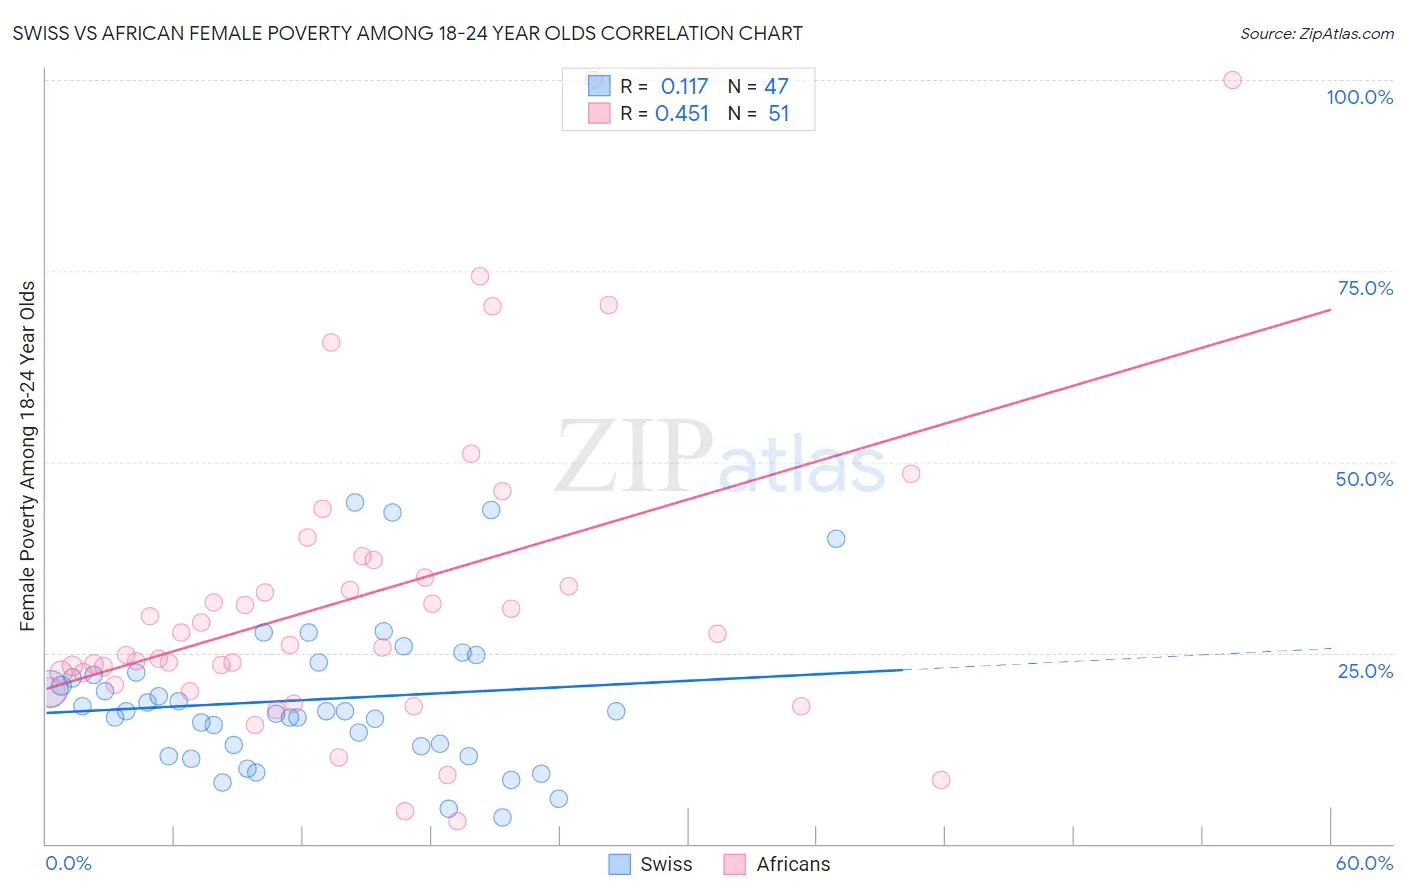 Swiss vs African Female Poverty Among 18-24 Year Olds